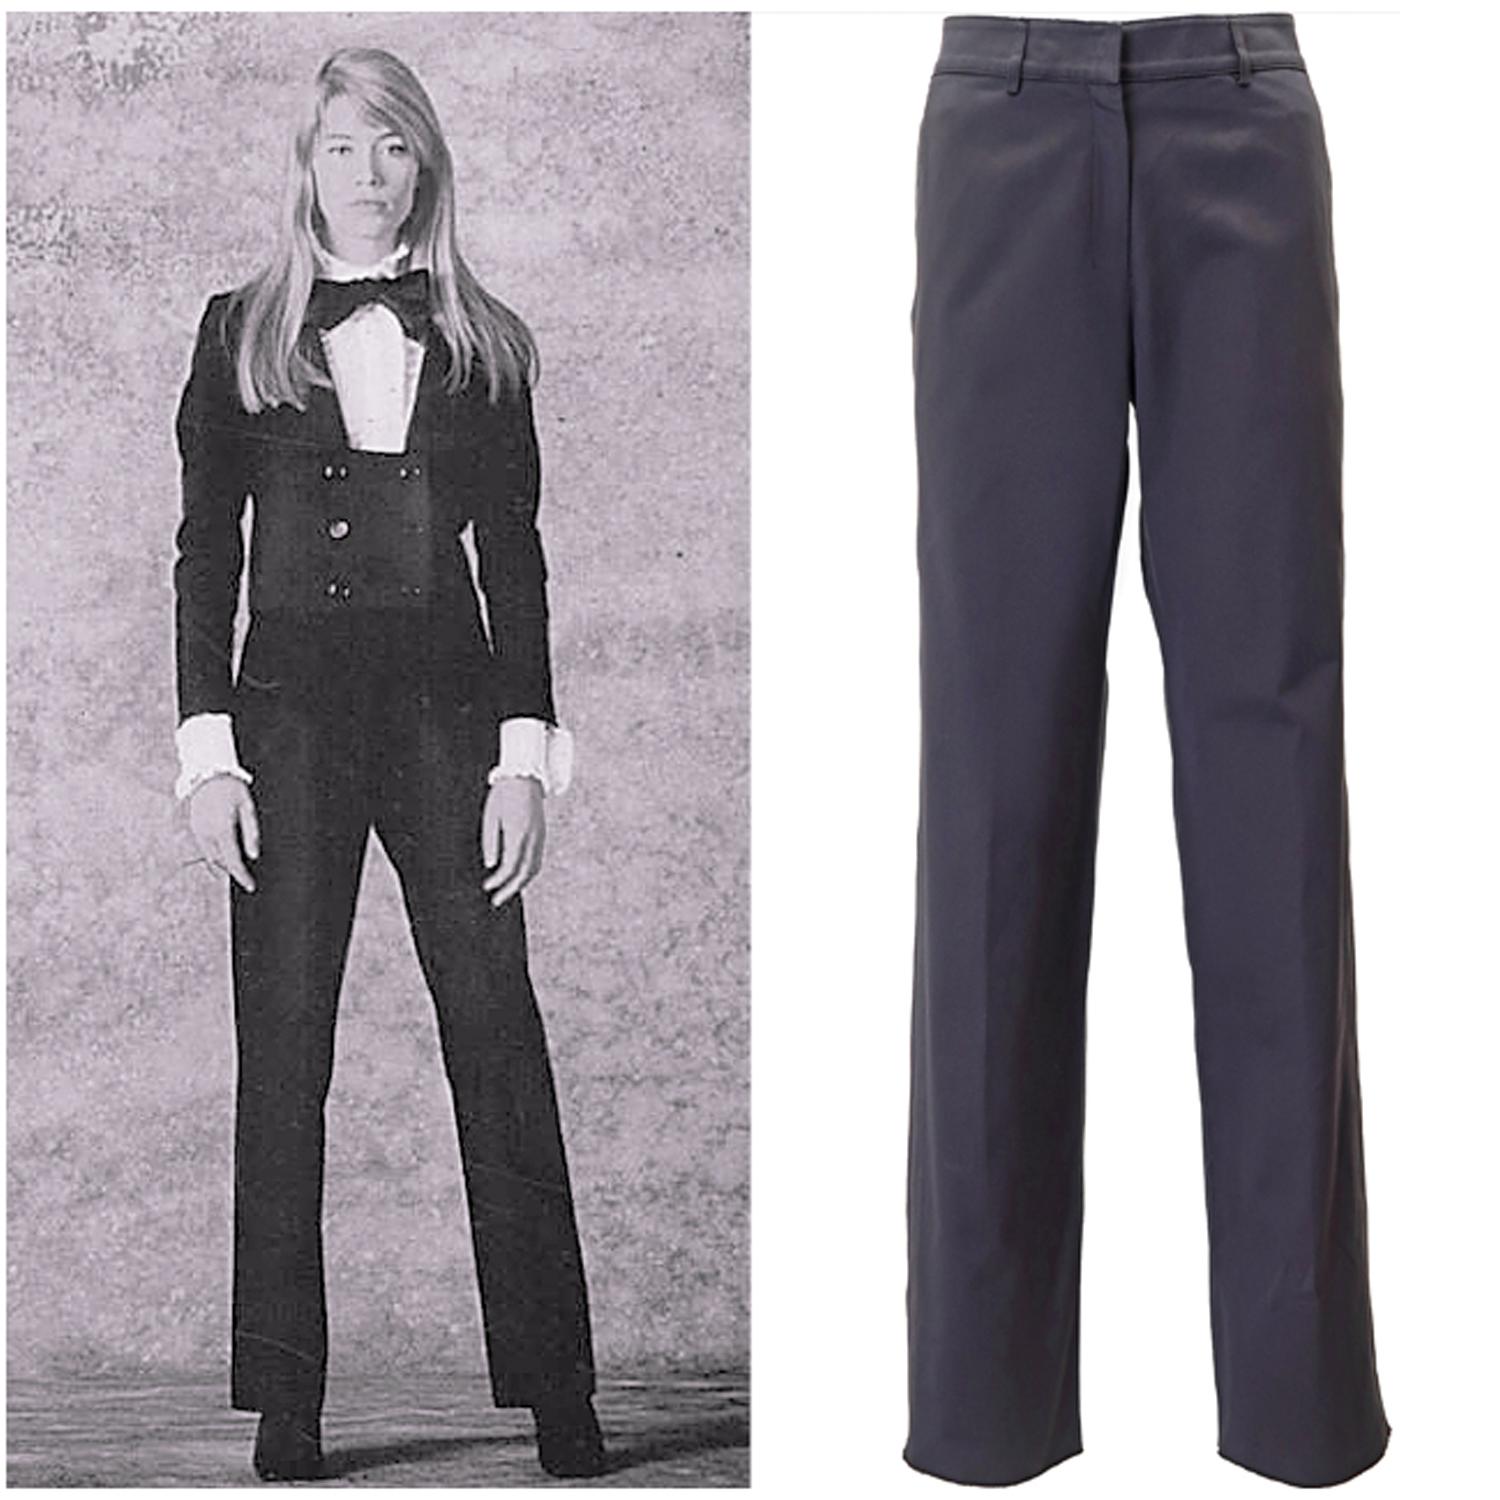 Yves Saint Laurent by Tom Ford FW-2001 Higher Waist Cotton Pants For Sale 1